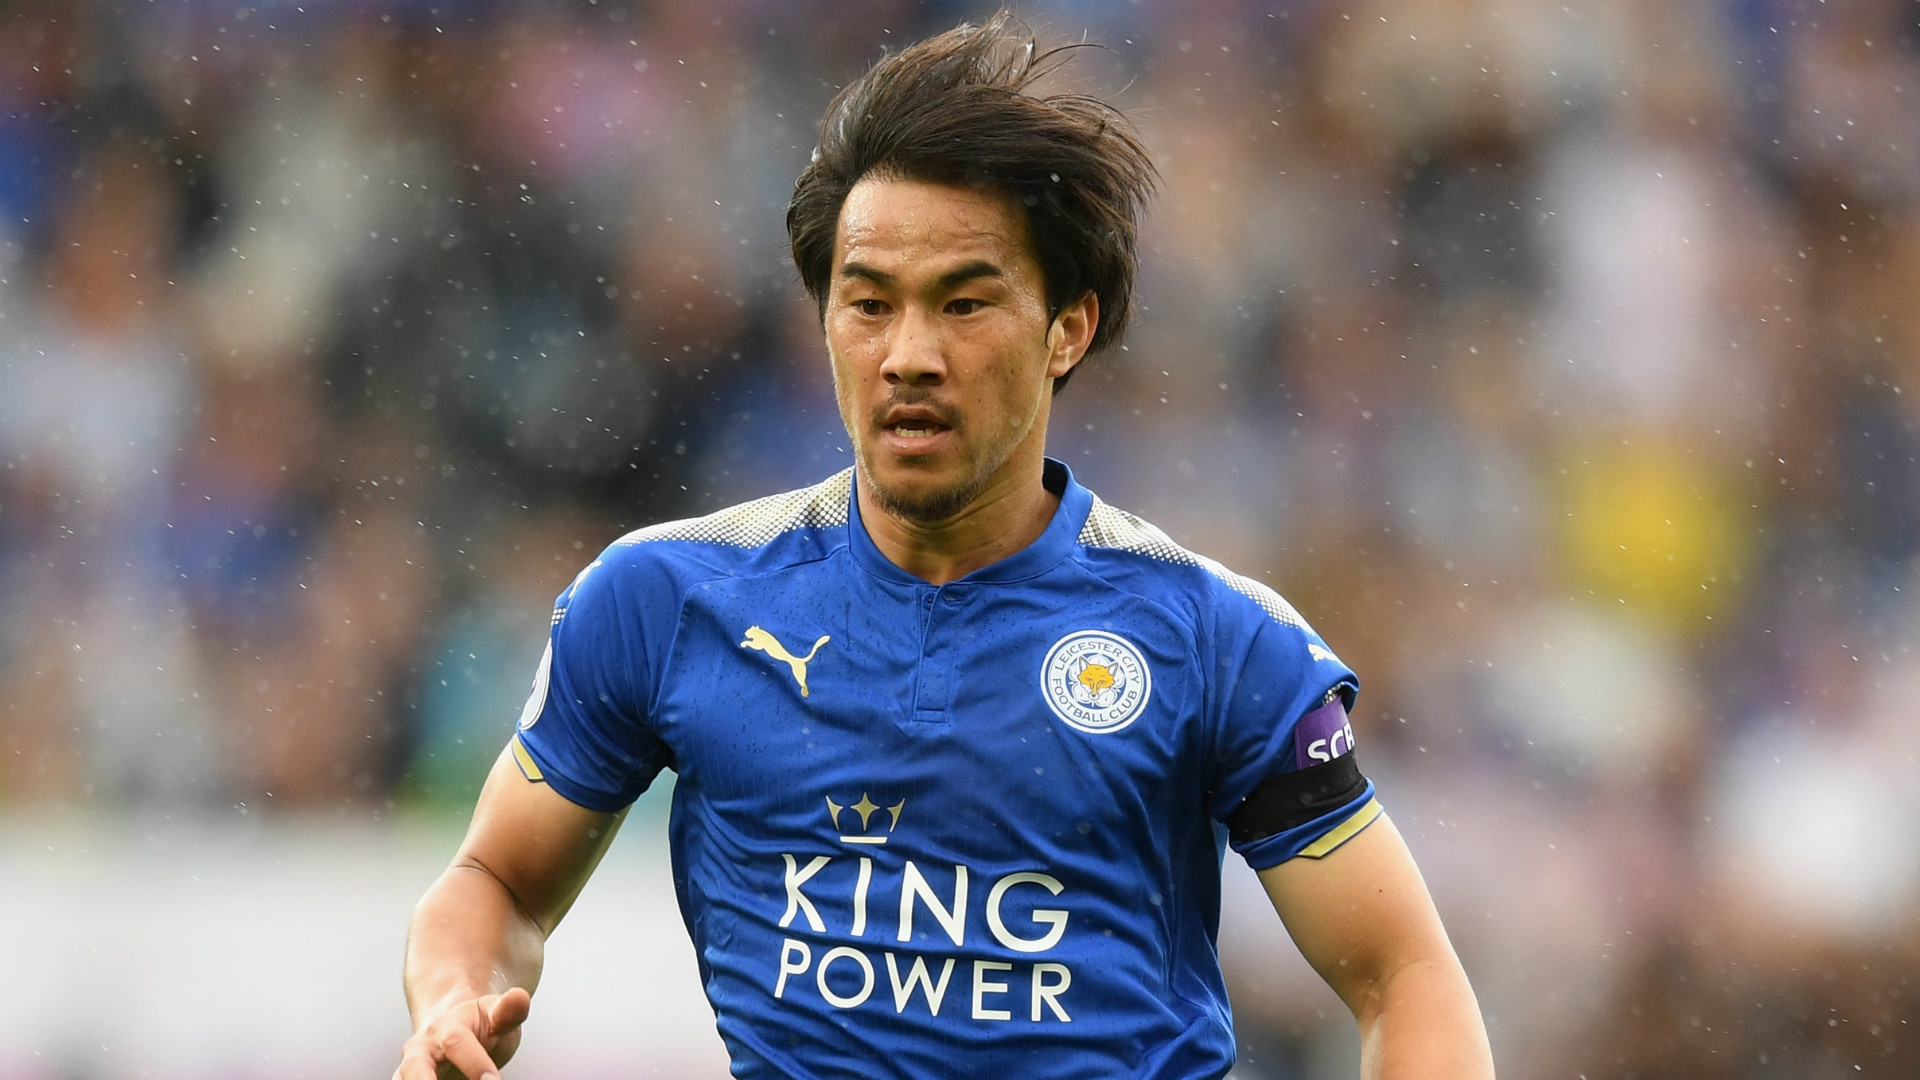 Leicester City should offload out-of-favour star Shinji Okazaki1920 x 1080